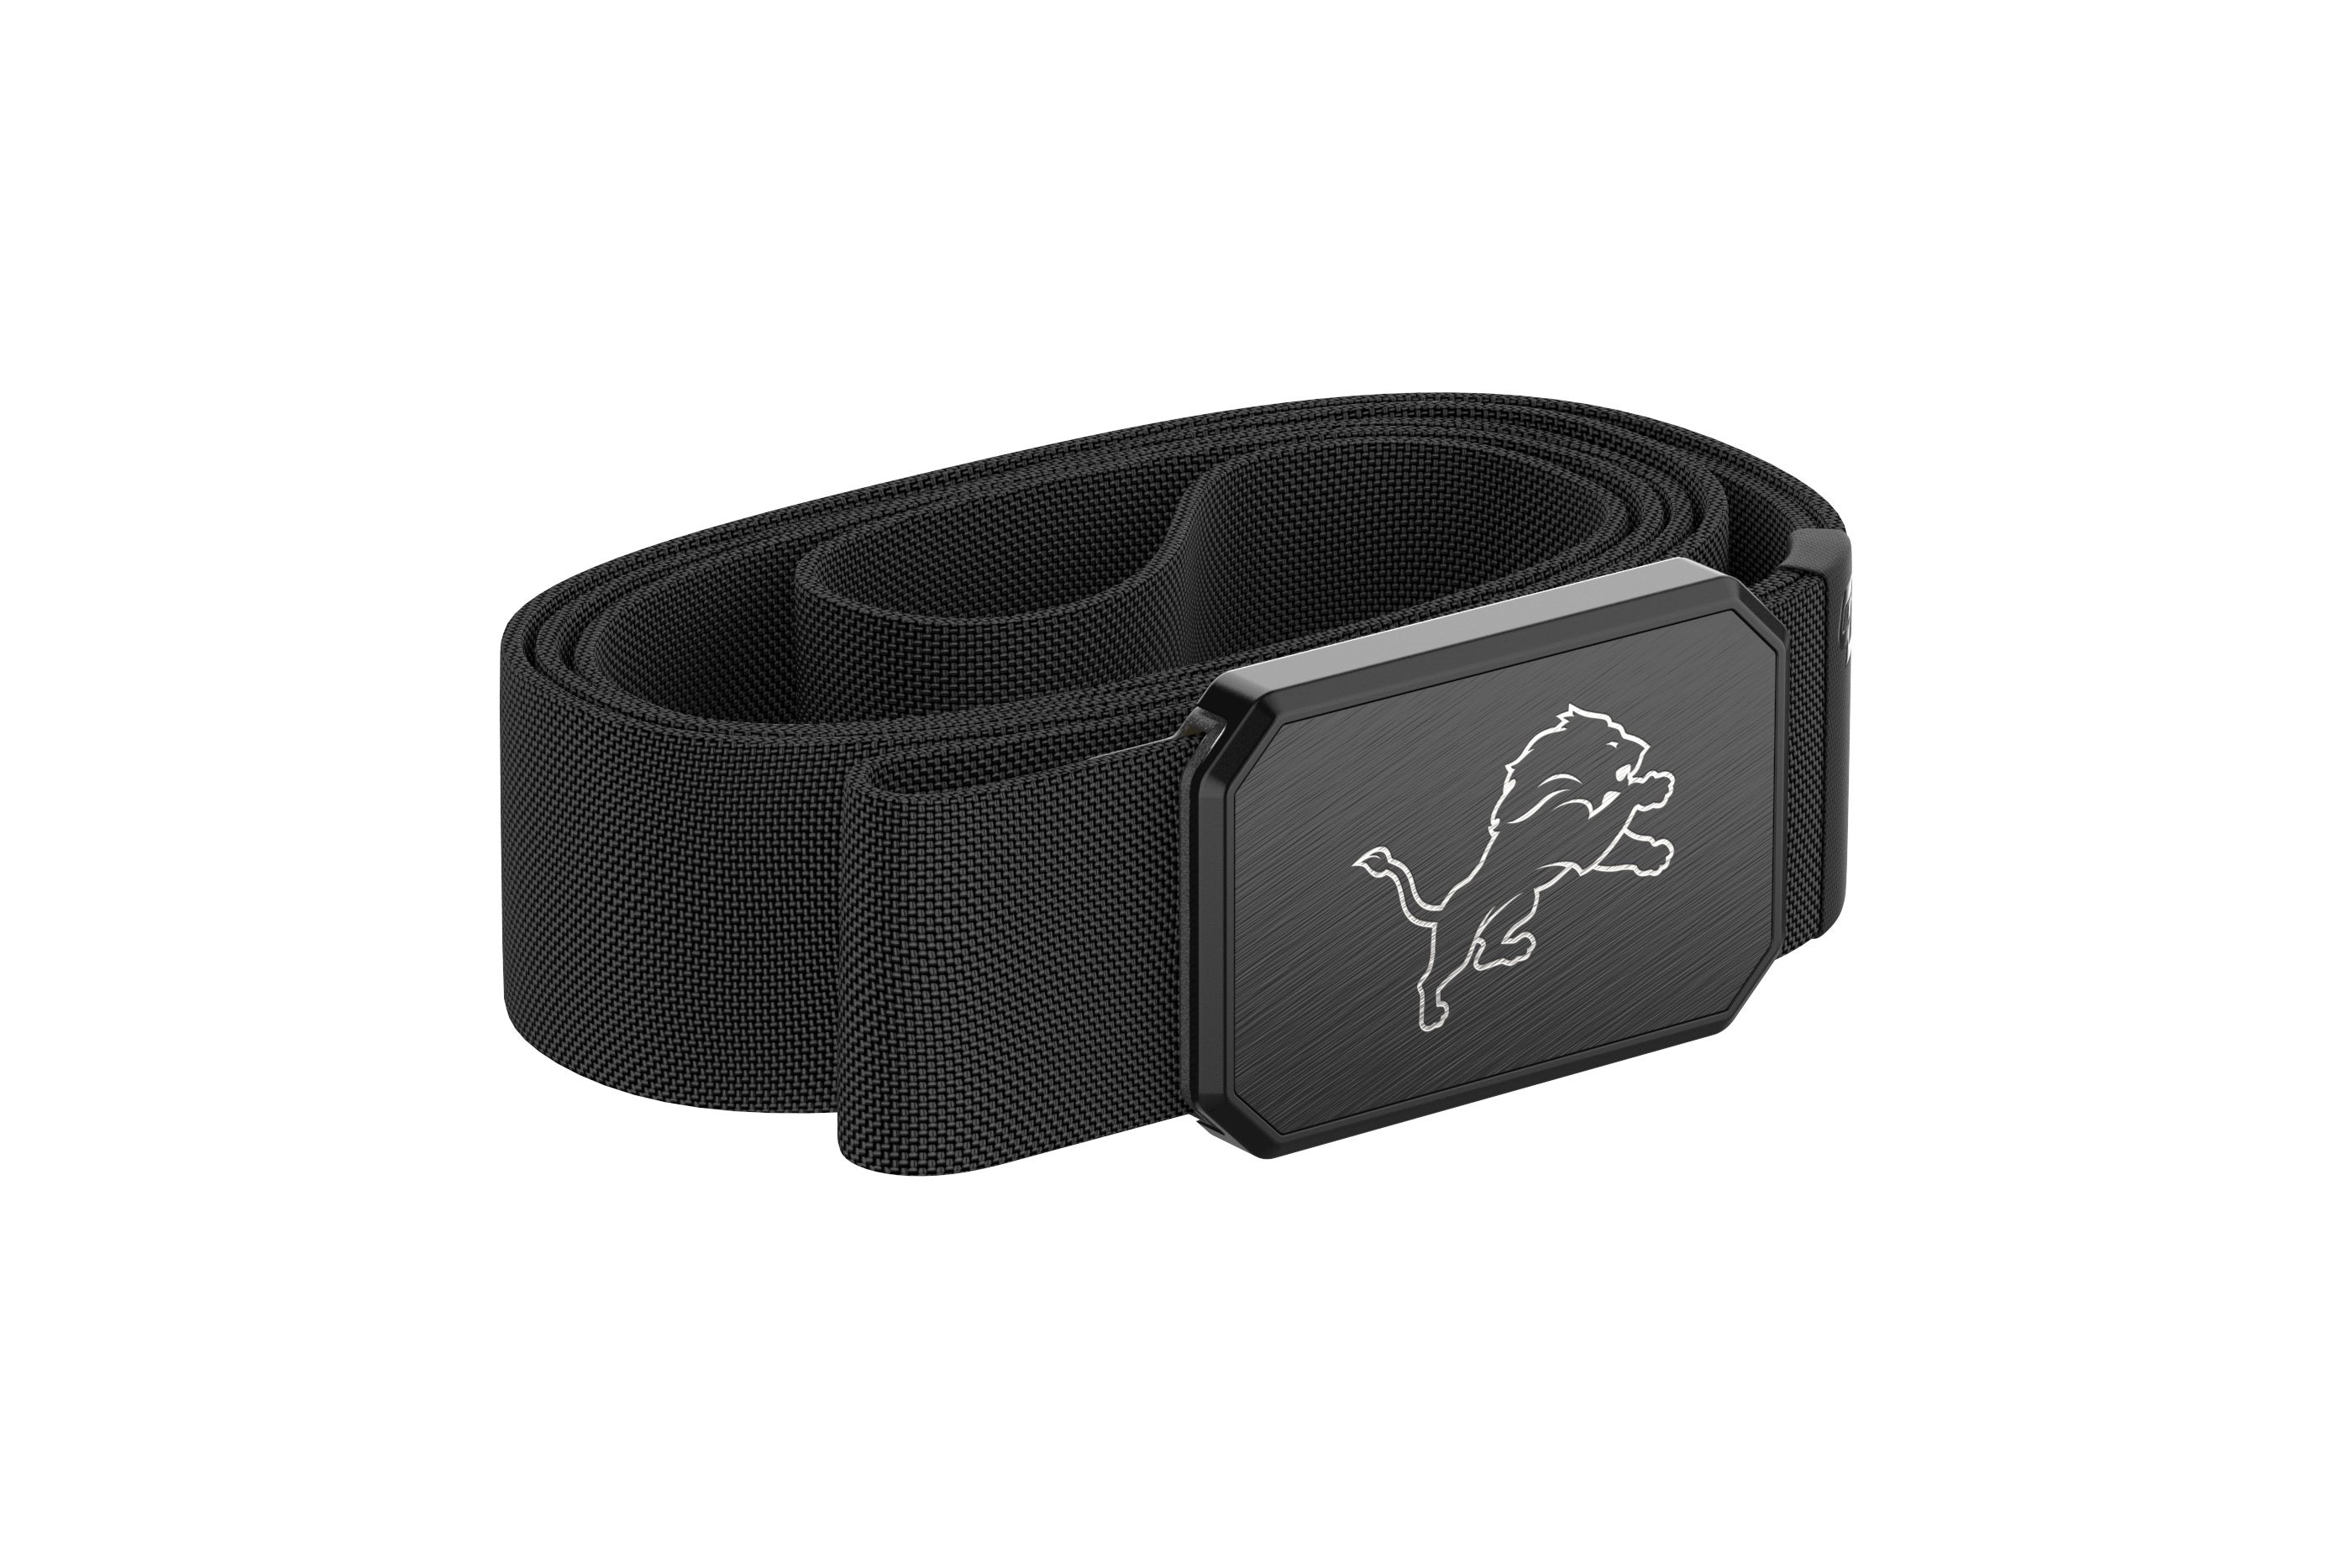 Lions Groove Belt side view